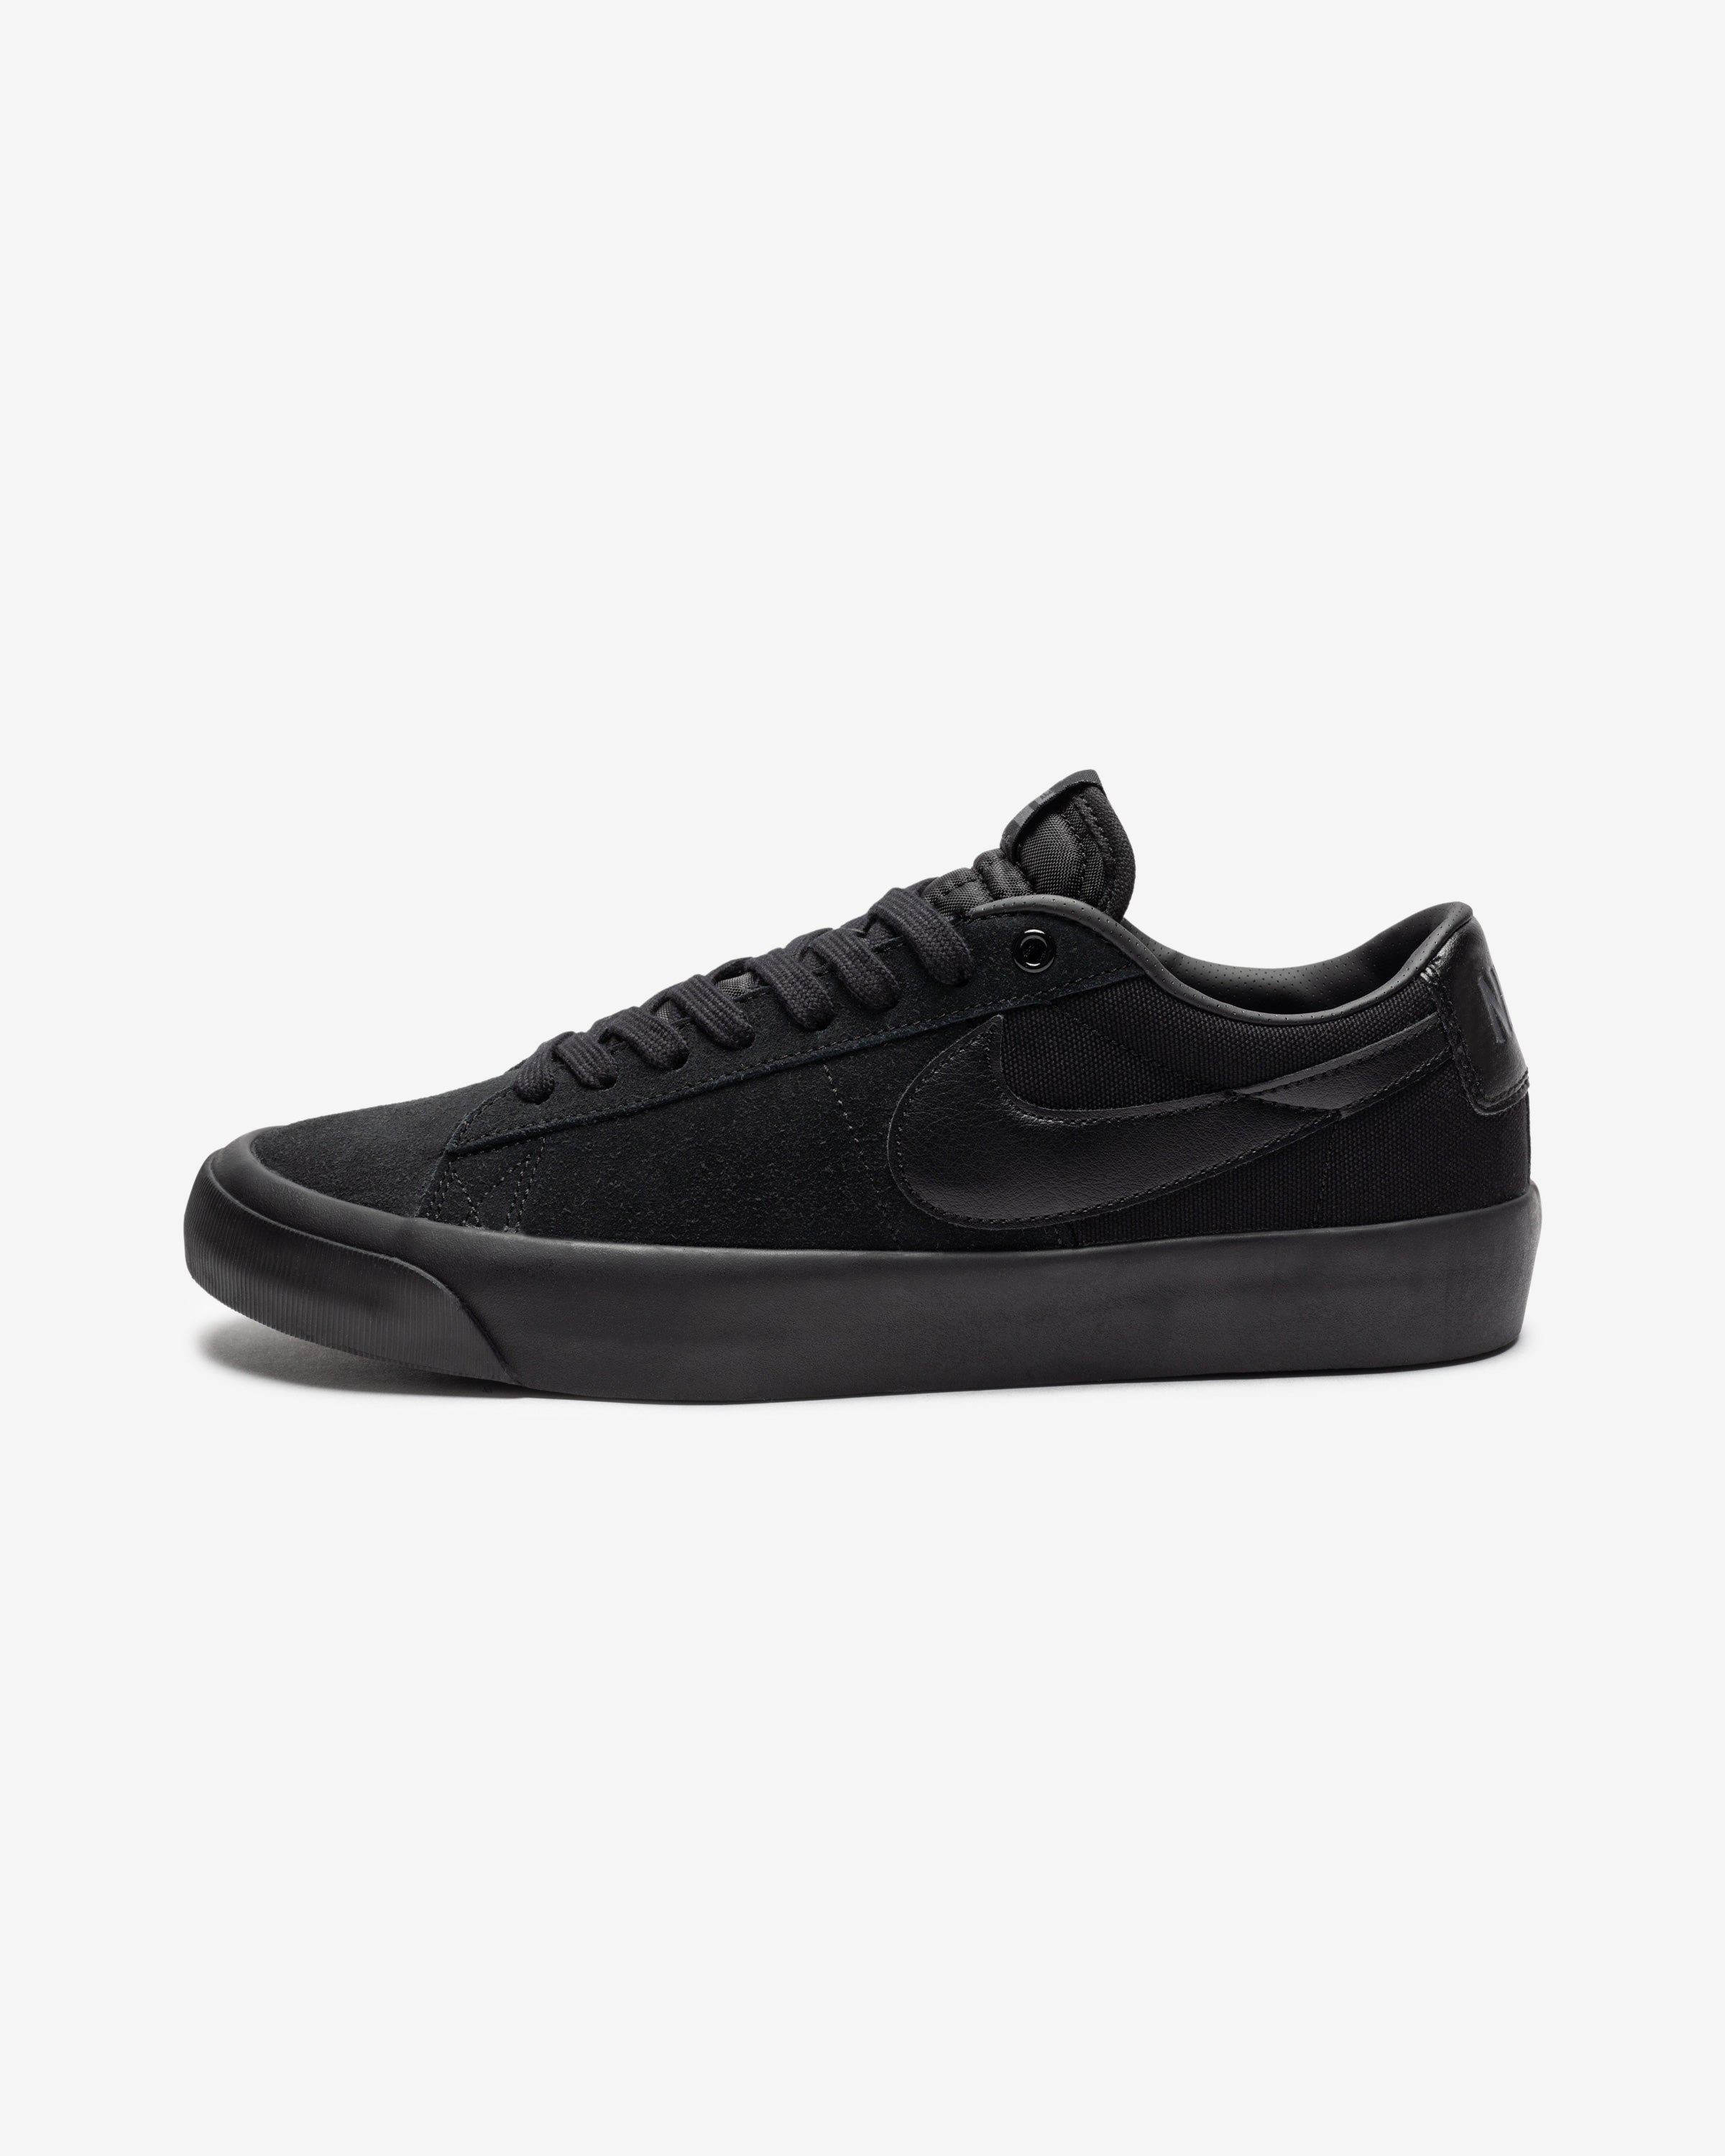 SB ZOOM PRO GT - BLACK/ ANTHRACITE – Undefeated